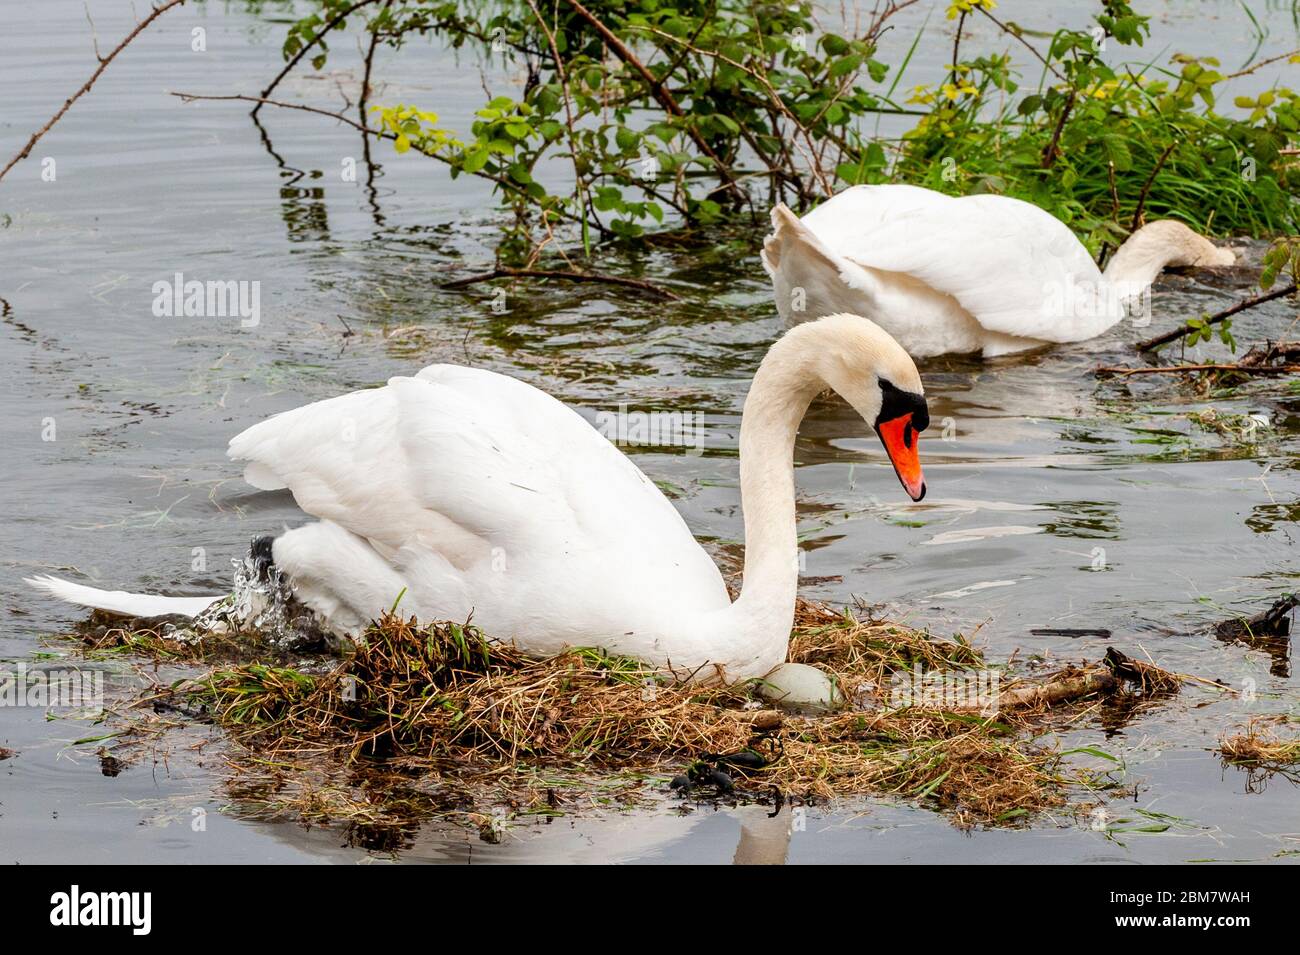 Timoleague, West Cork, Ireland. 7th May, 2020. Timoleague flooded tonight at high tide which meant the nesting swans lost their remaining egg to the water. The swans have been nesting for 5 weeks. The same swans lost their eggs last year. Credit: AG News/Alamy Live News Stock Photo